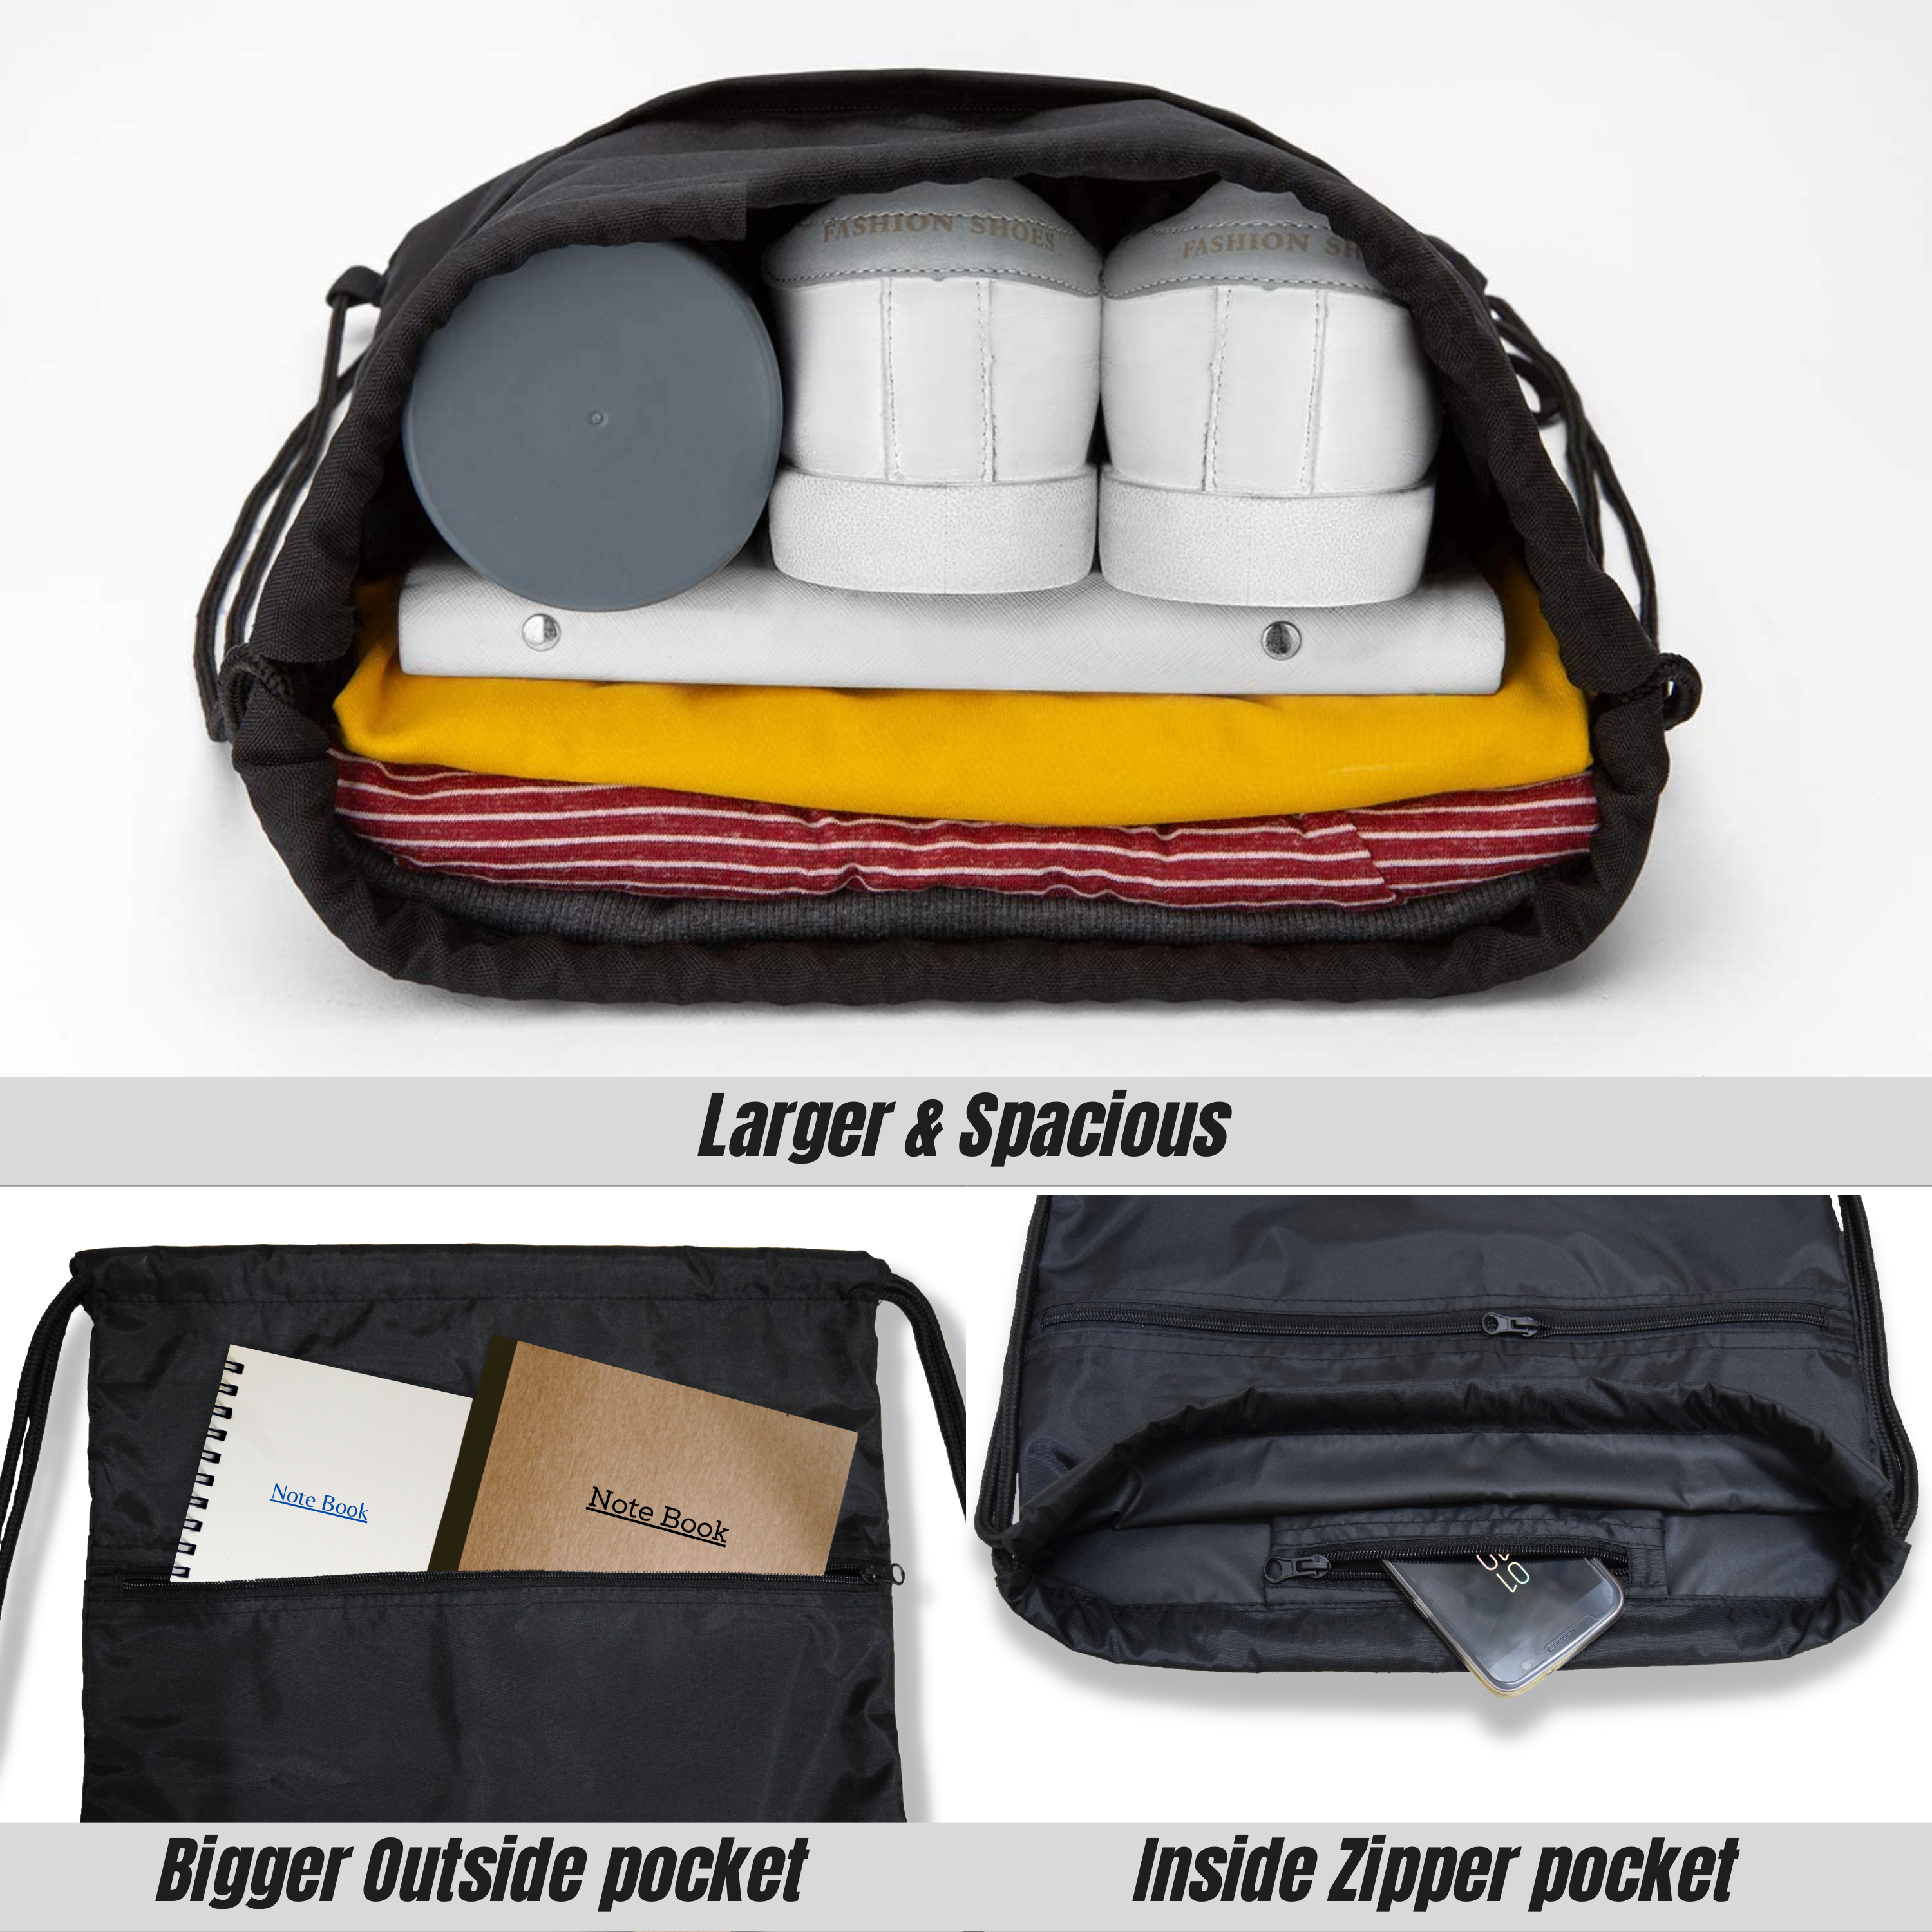 Trainer Travel Bag for Swimming, Gym, School, Beach and Sports Repton Fitness Gear